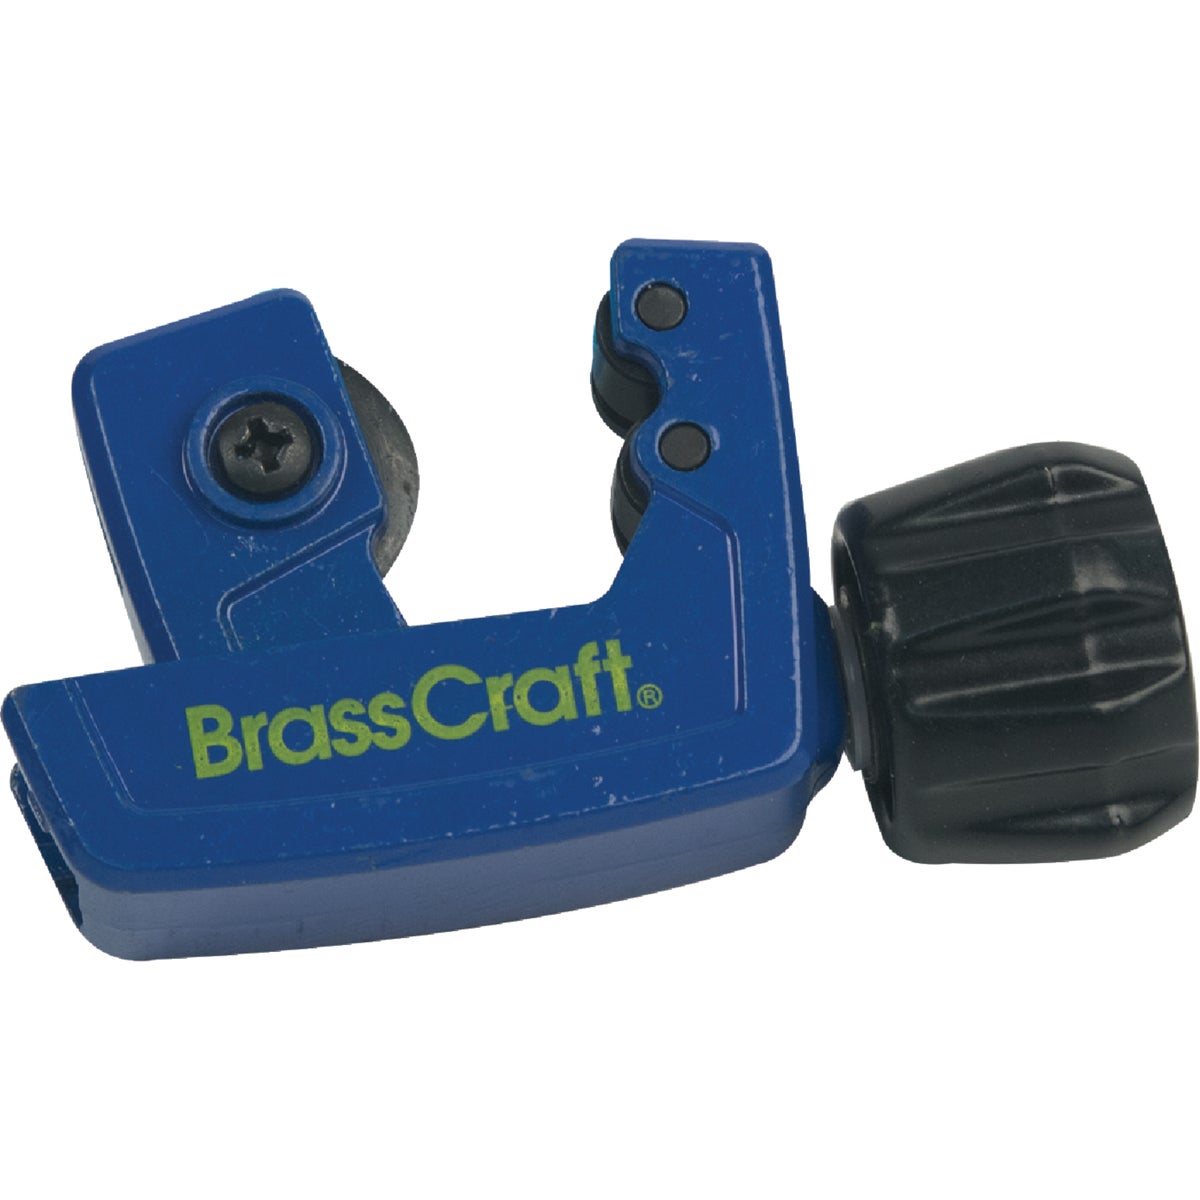 BrassCraft Up to 1-1/8 In. Mini Tubing Cutter with Rollers